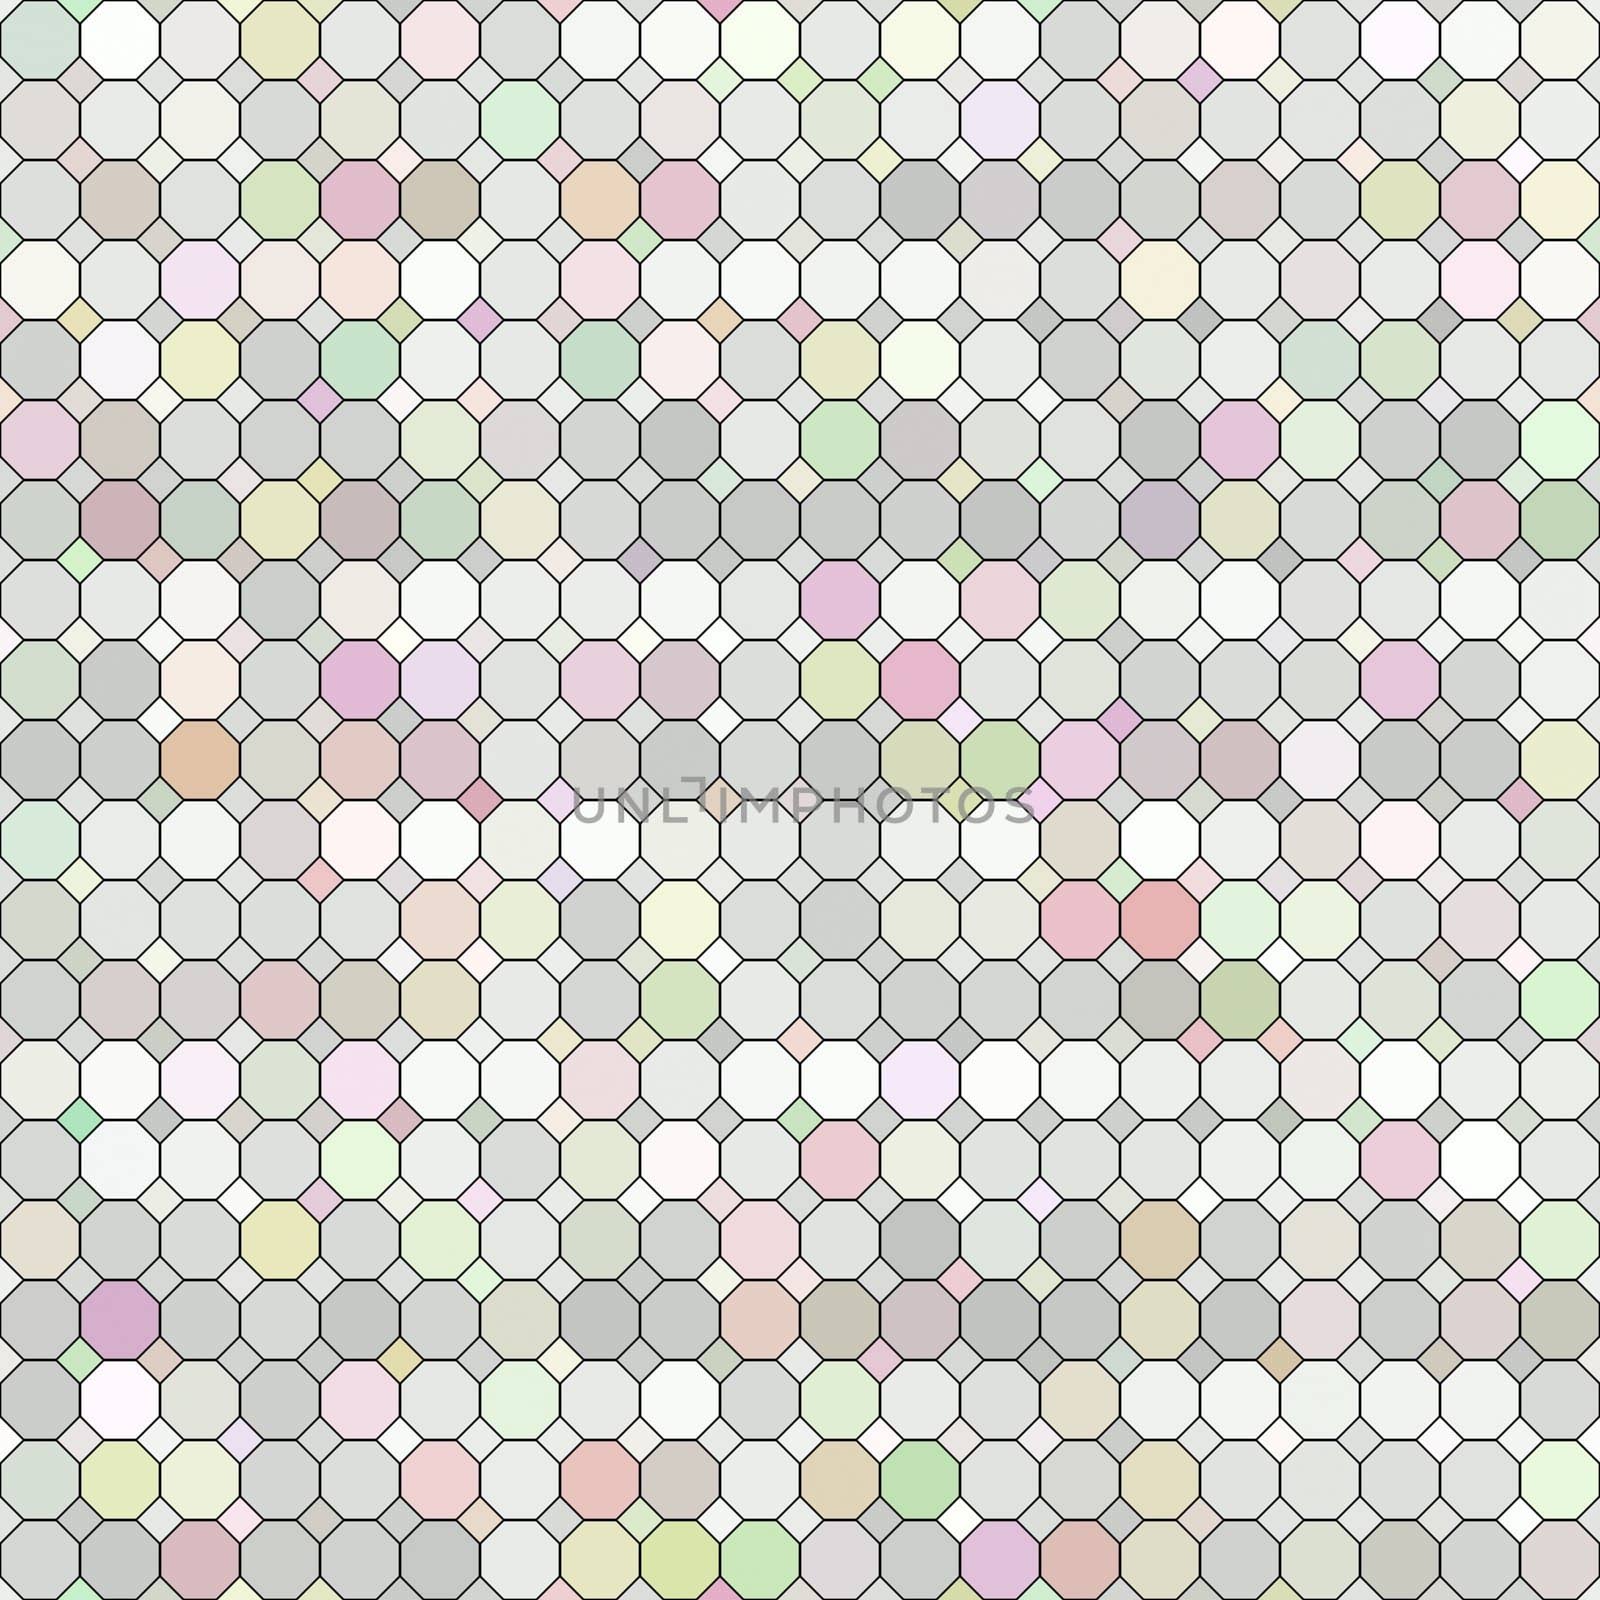 seamless texture of different pastel colored tiles